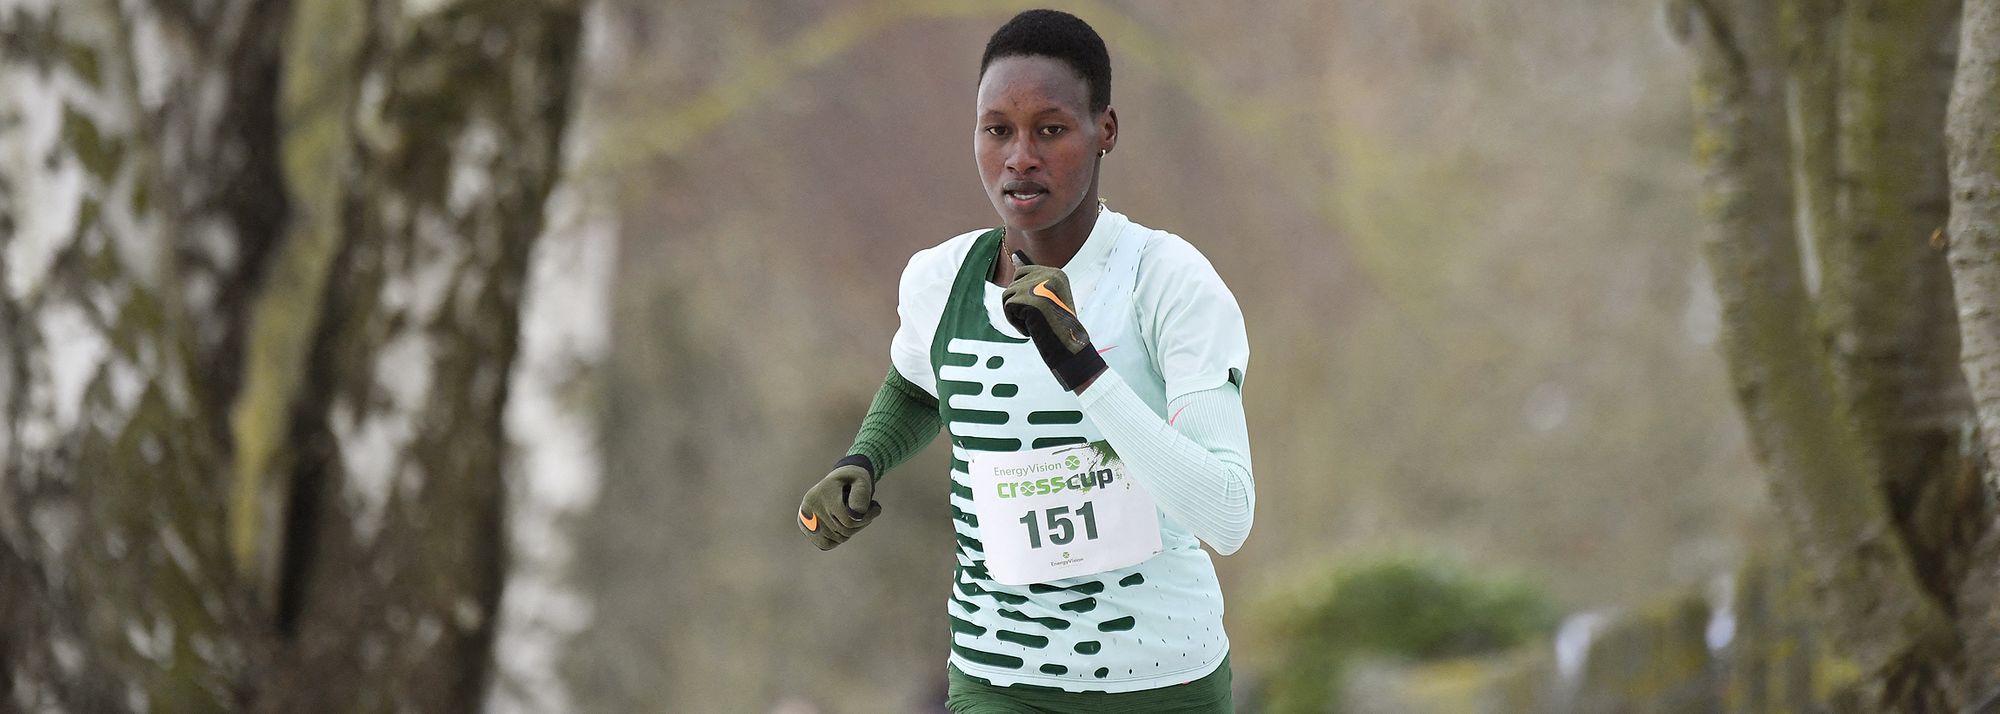 Edinah Jebitok notched up her third Gold-level victory in this season’s World Athletics Cross Country Tour